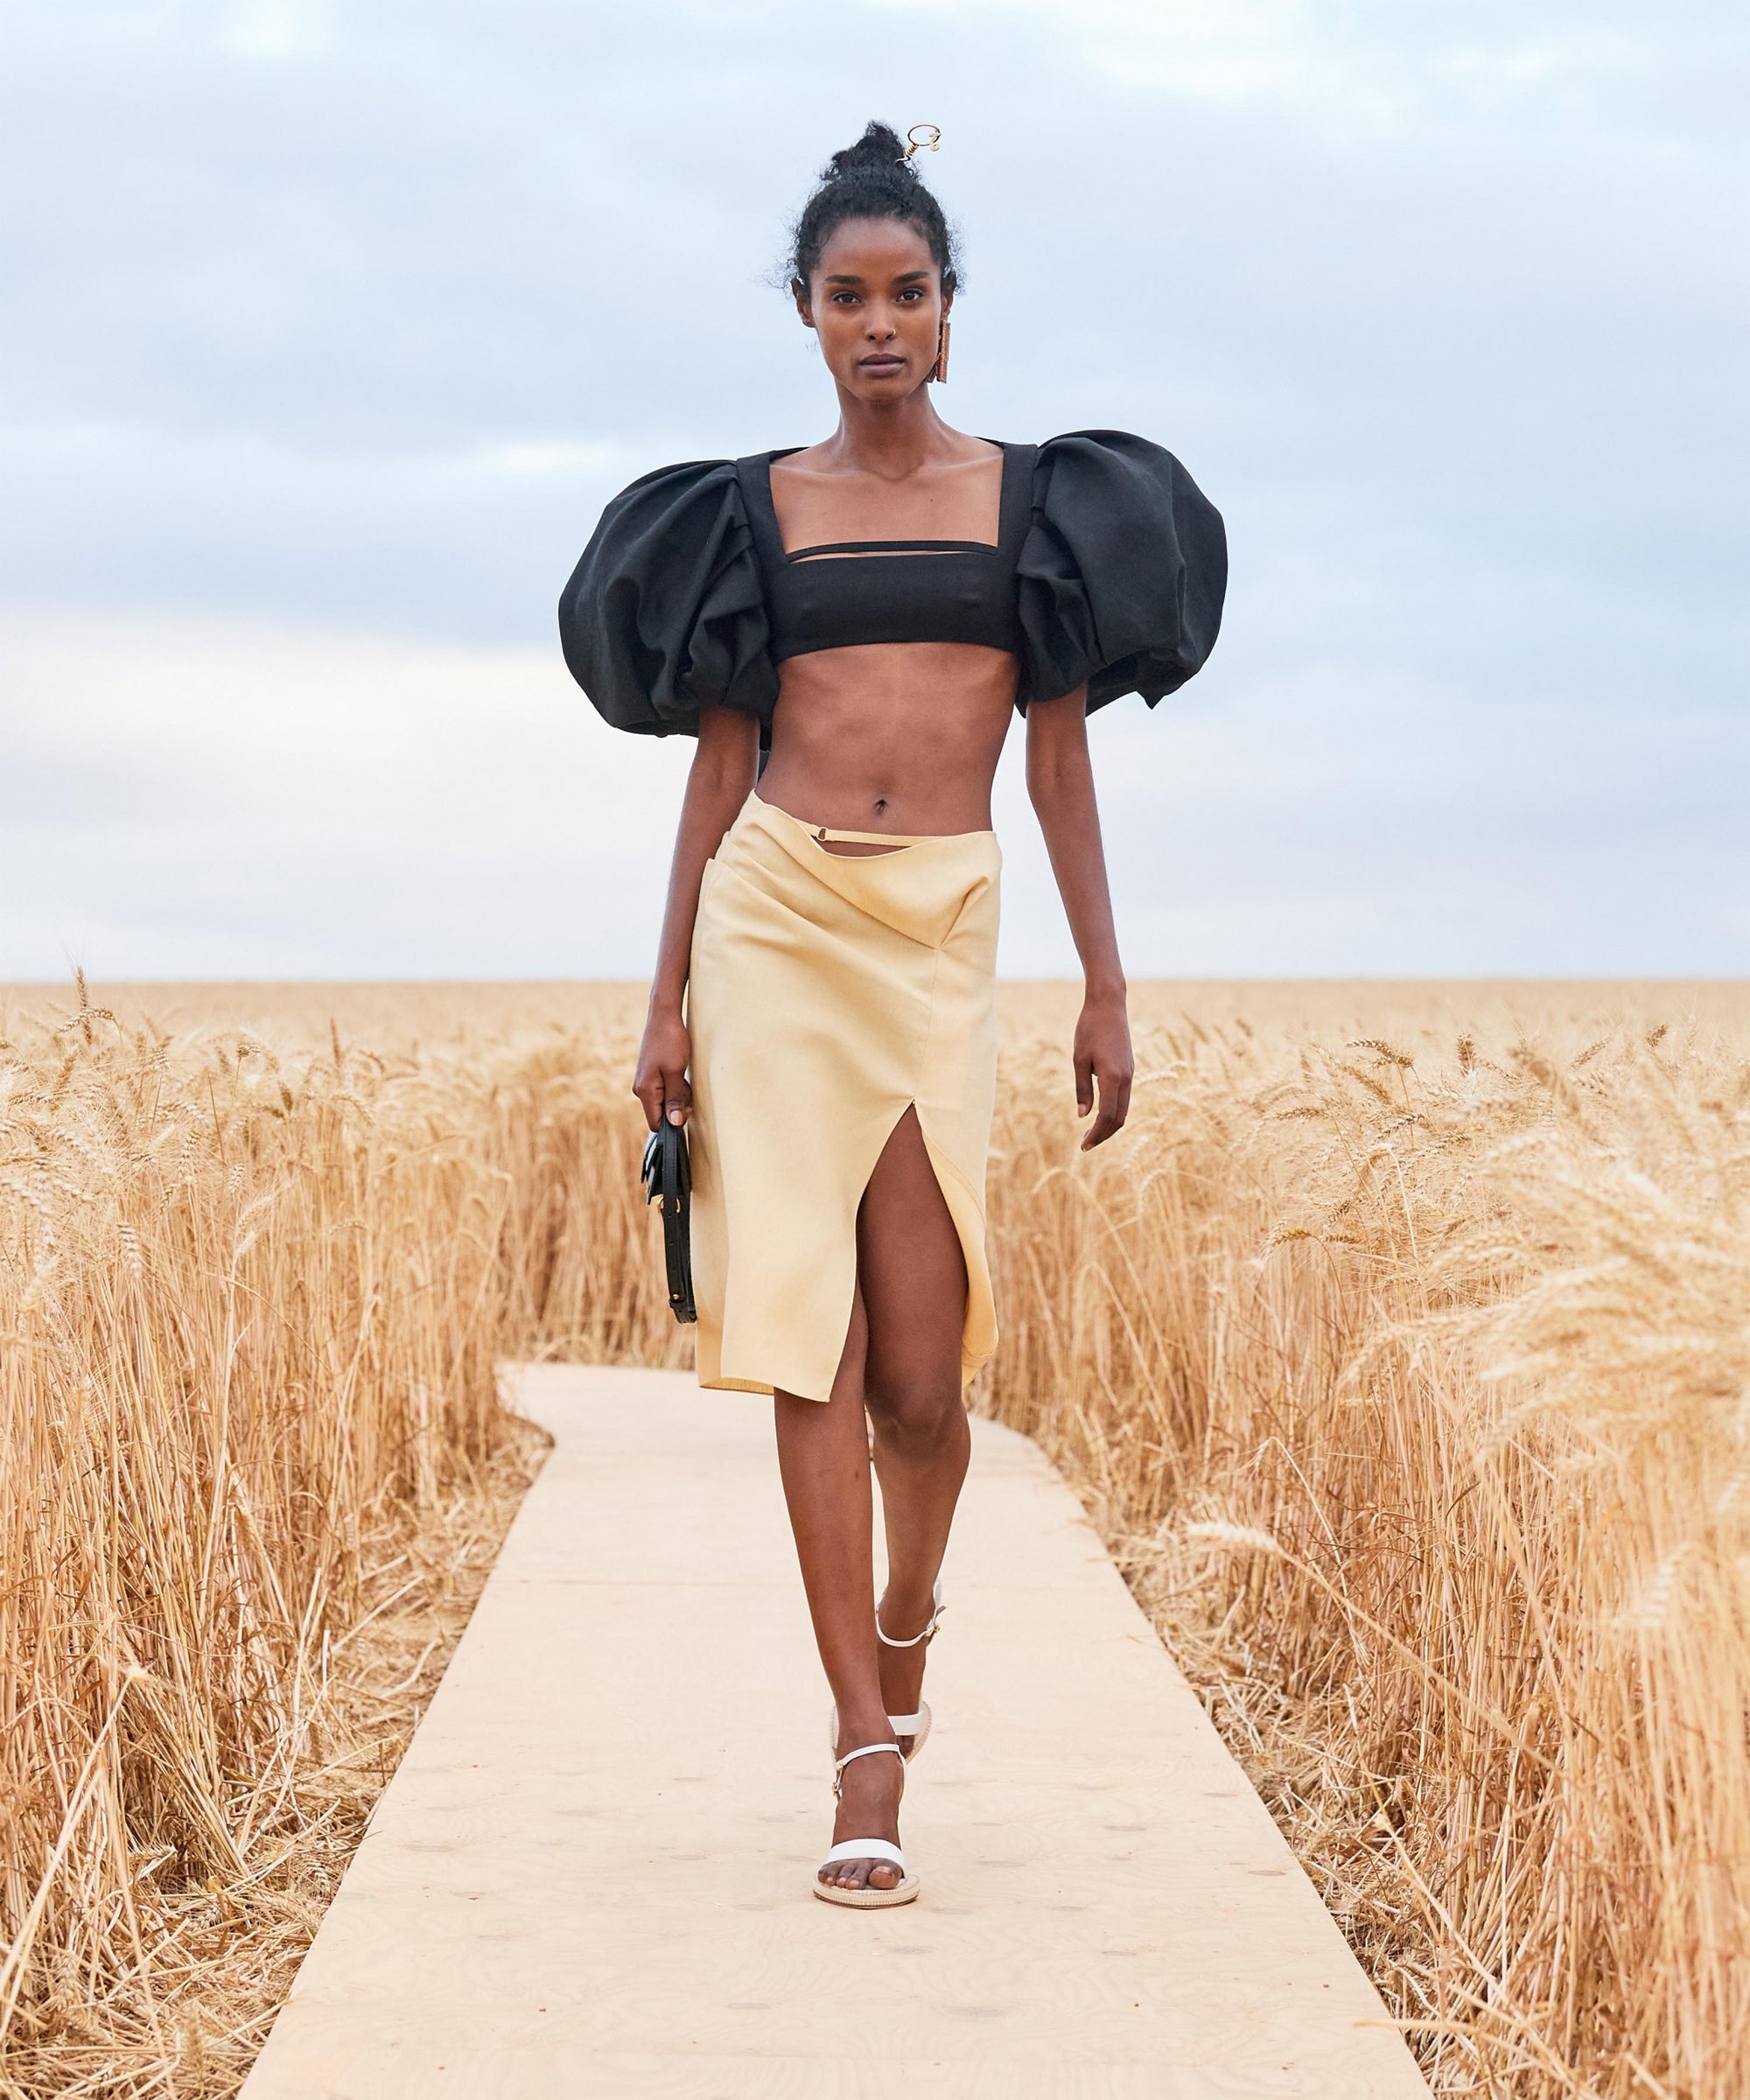 The Love of Nature at Jacquemus Spring/Summer 2023 Show